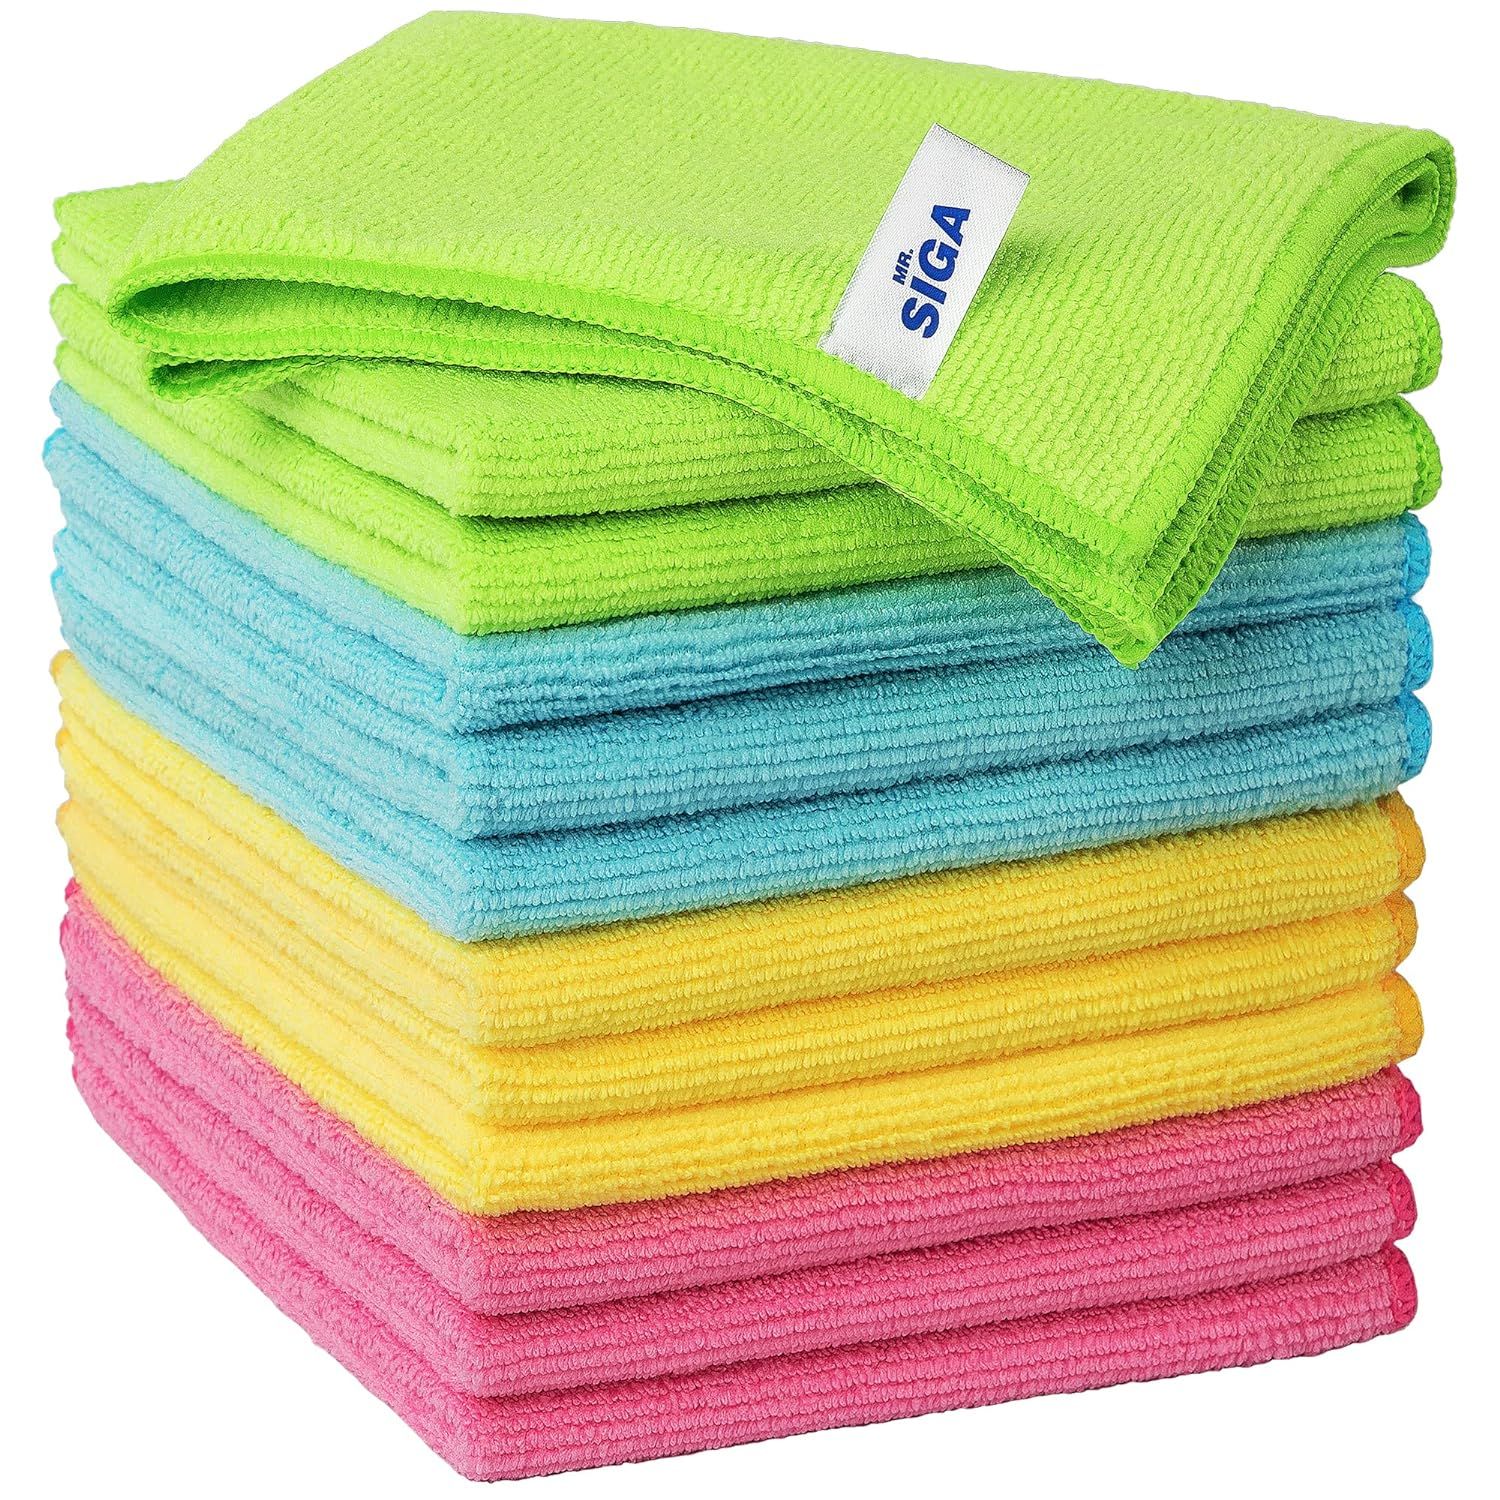 MR.SIGA Microfiber Cleaning Cloth,Pack of 12,Size:12.6" x 12.6" | Amazon (US)